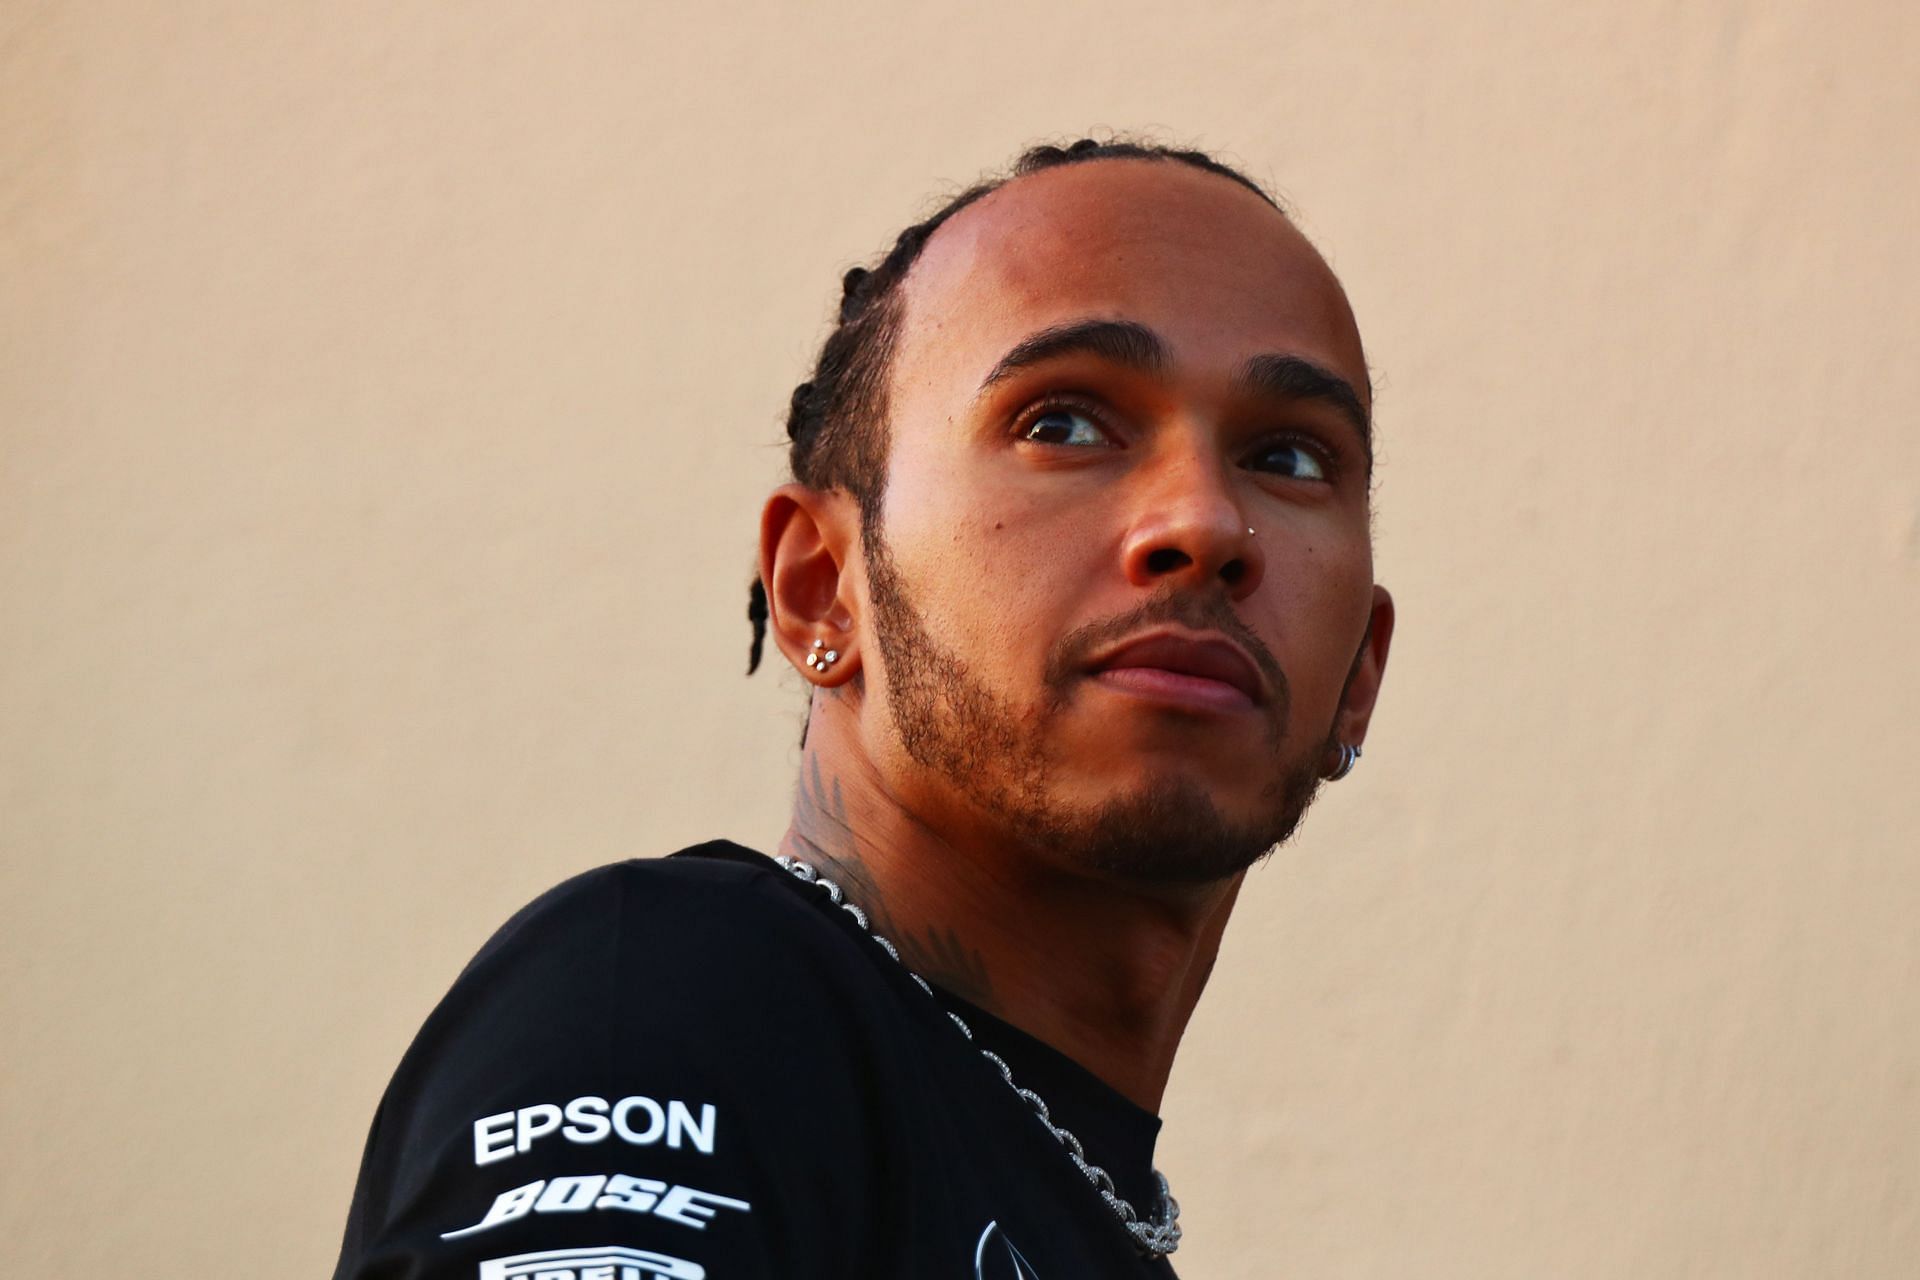 Lewis Hamilton is the only black driver on the F1 grid